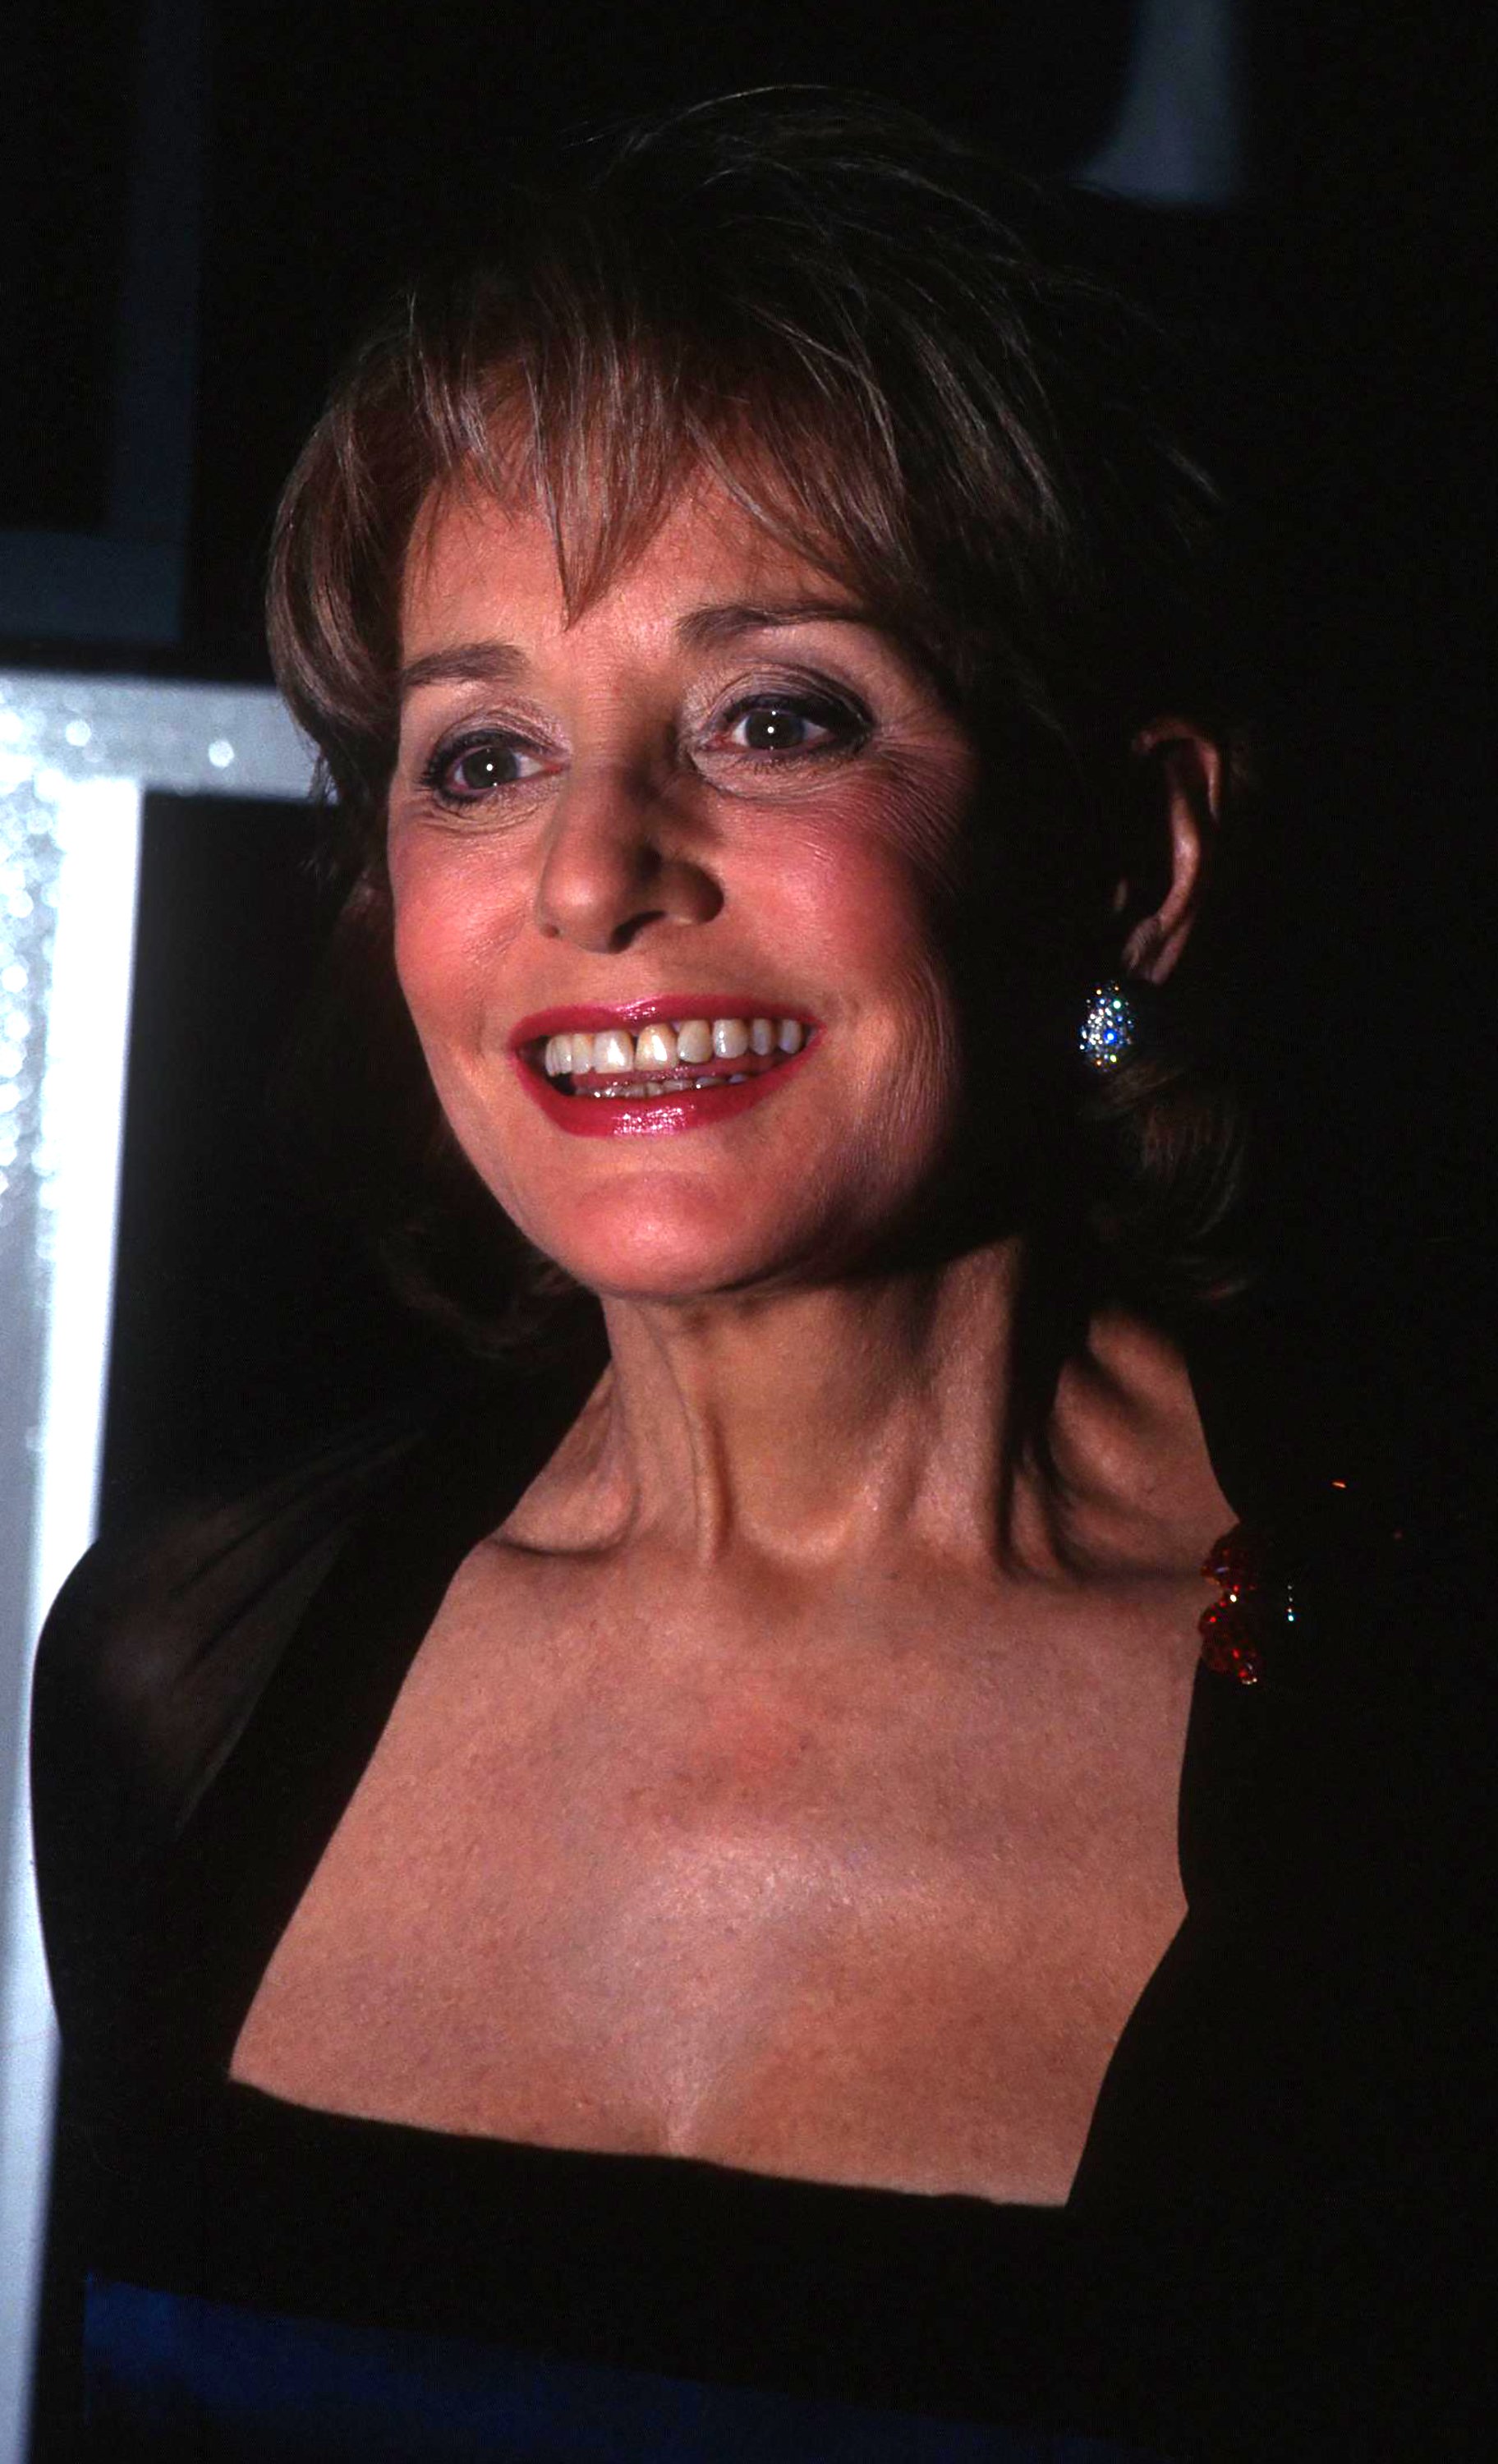 Broadcast journalist Barbara Walters attending Museum of Television and Radio Gala Honoring Alan Alda and Barbara Walters at the Waldorf Astoria Hotel in New York City on February 8, 1996. / Source: Getty Images